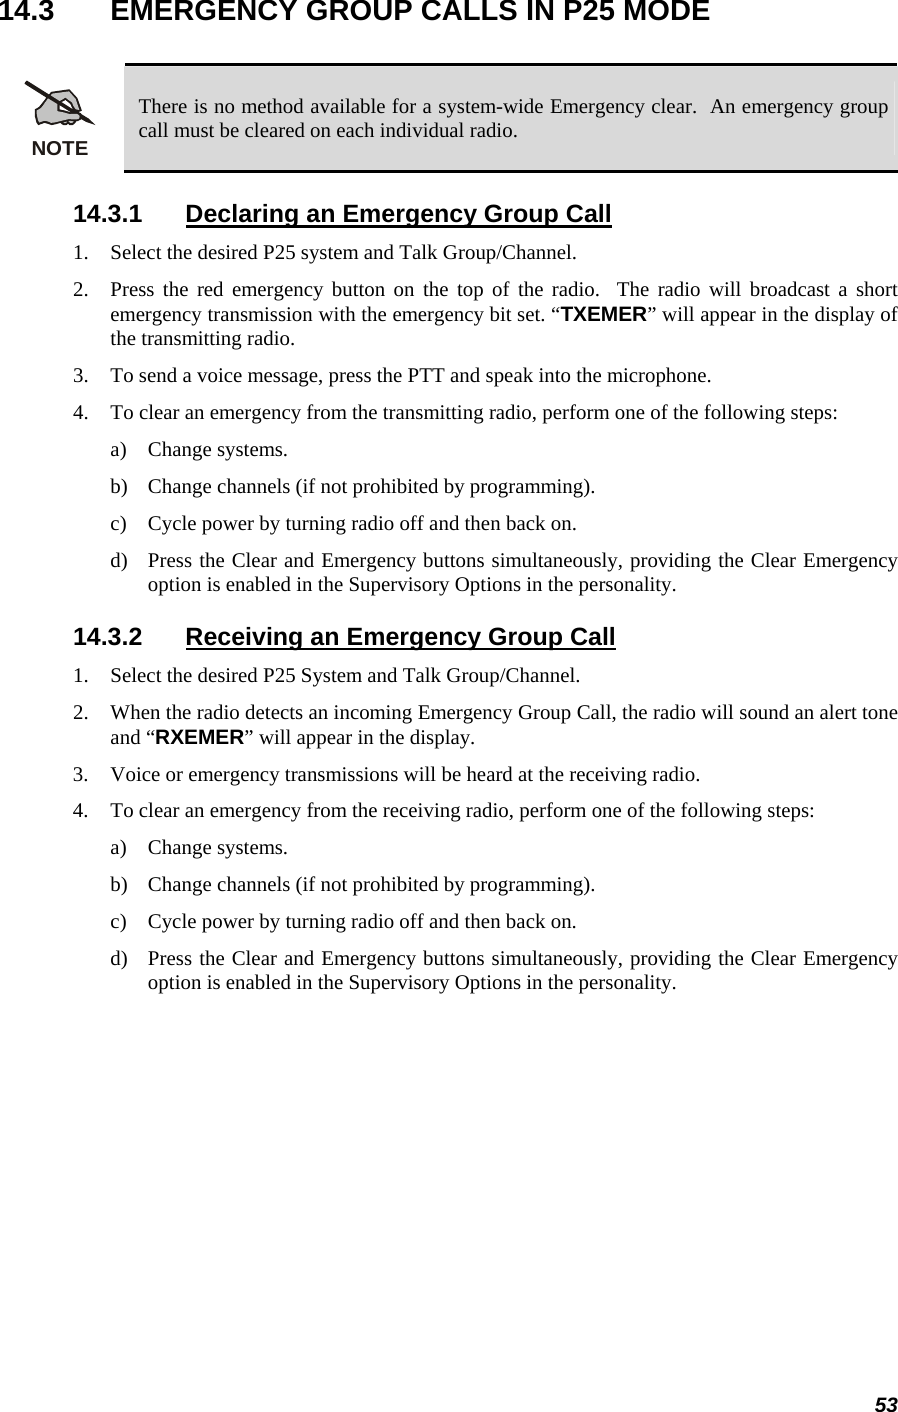 53 14.3  EMERGENCY GROUP CALLS IN P25 MODE  NOTE There is no method available for a system-wide Emergency clear.  An emergency group call must be cleared on each individual radio. 14.3.1  Declaring an Emergency Group Call 1. Select the desired P25 system and Talk Group/Channel. 2. Press the red emergency button on the top of the radio.  The radio will broadcast a short emergency transmission with the emergency bit set. “TXEMER” will appear in the display of the transmitting radio. 3. To send a voice message, press the PTT and speak into the microphone. 4. To clear an emergency from the transmitting radio, perform one of the following steps: a) Change systems. b) Change channels (if not prohibited by programming). c) Cycle power by turning radio off and then back on. d) Press the Clear and Emergency buttons simultaneously, providing the Clear Emergency option is enabled in the Supervisory Options in the personality. 14.3.2  Receiving an Emergency Group Call 1. Select the desired P25 System and Talk Group/Channel. 2. When the radio detects an incoming Emergency Group Call, the radio will sound an alert tone and “RXEMER” will appear in the display. 3. Voice or emergency transmissions will be heard at the receiving radio. 4. To clear an emergency from the receiving radio, perform one of the following steps: a) Change systems. b) Change channels (if not prohibited by programming). c) Cycle power by turning radio off and then back on.  d) Press the Clear and Emergency buttons simultaneously, providing the Clear Emergency option is enabled in the Supervisory Options in the personality. 